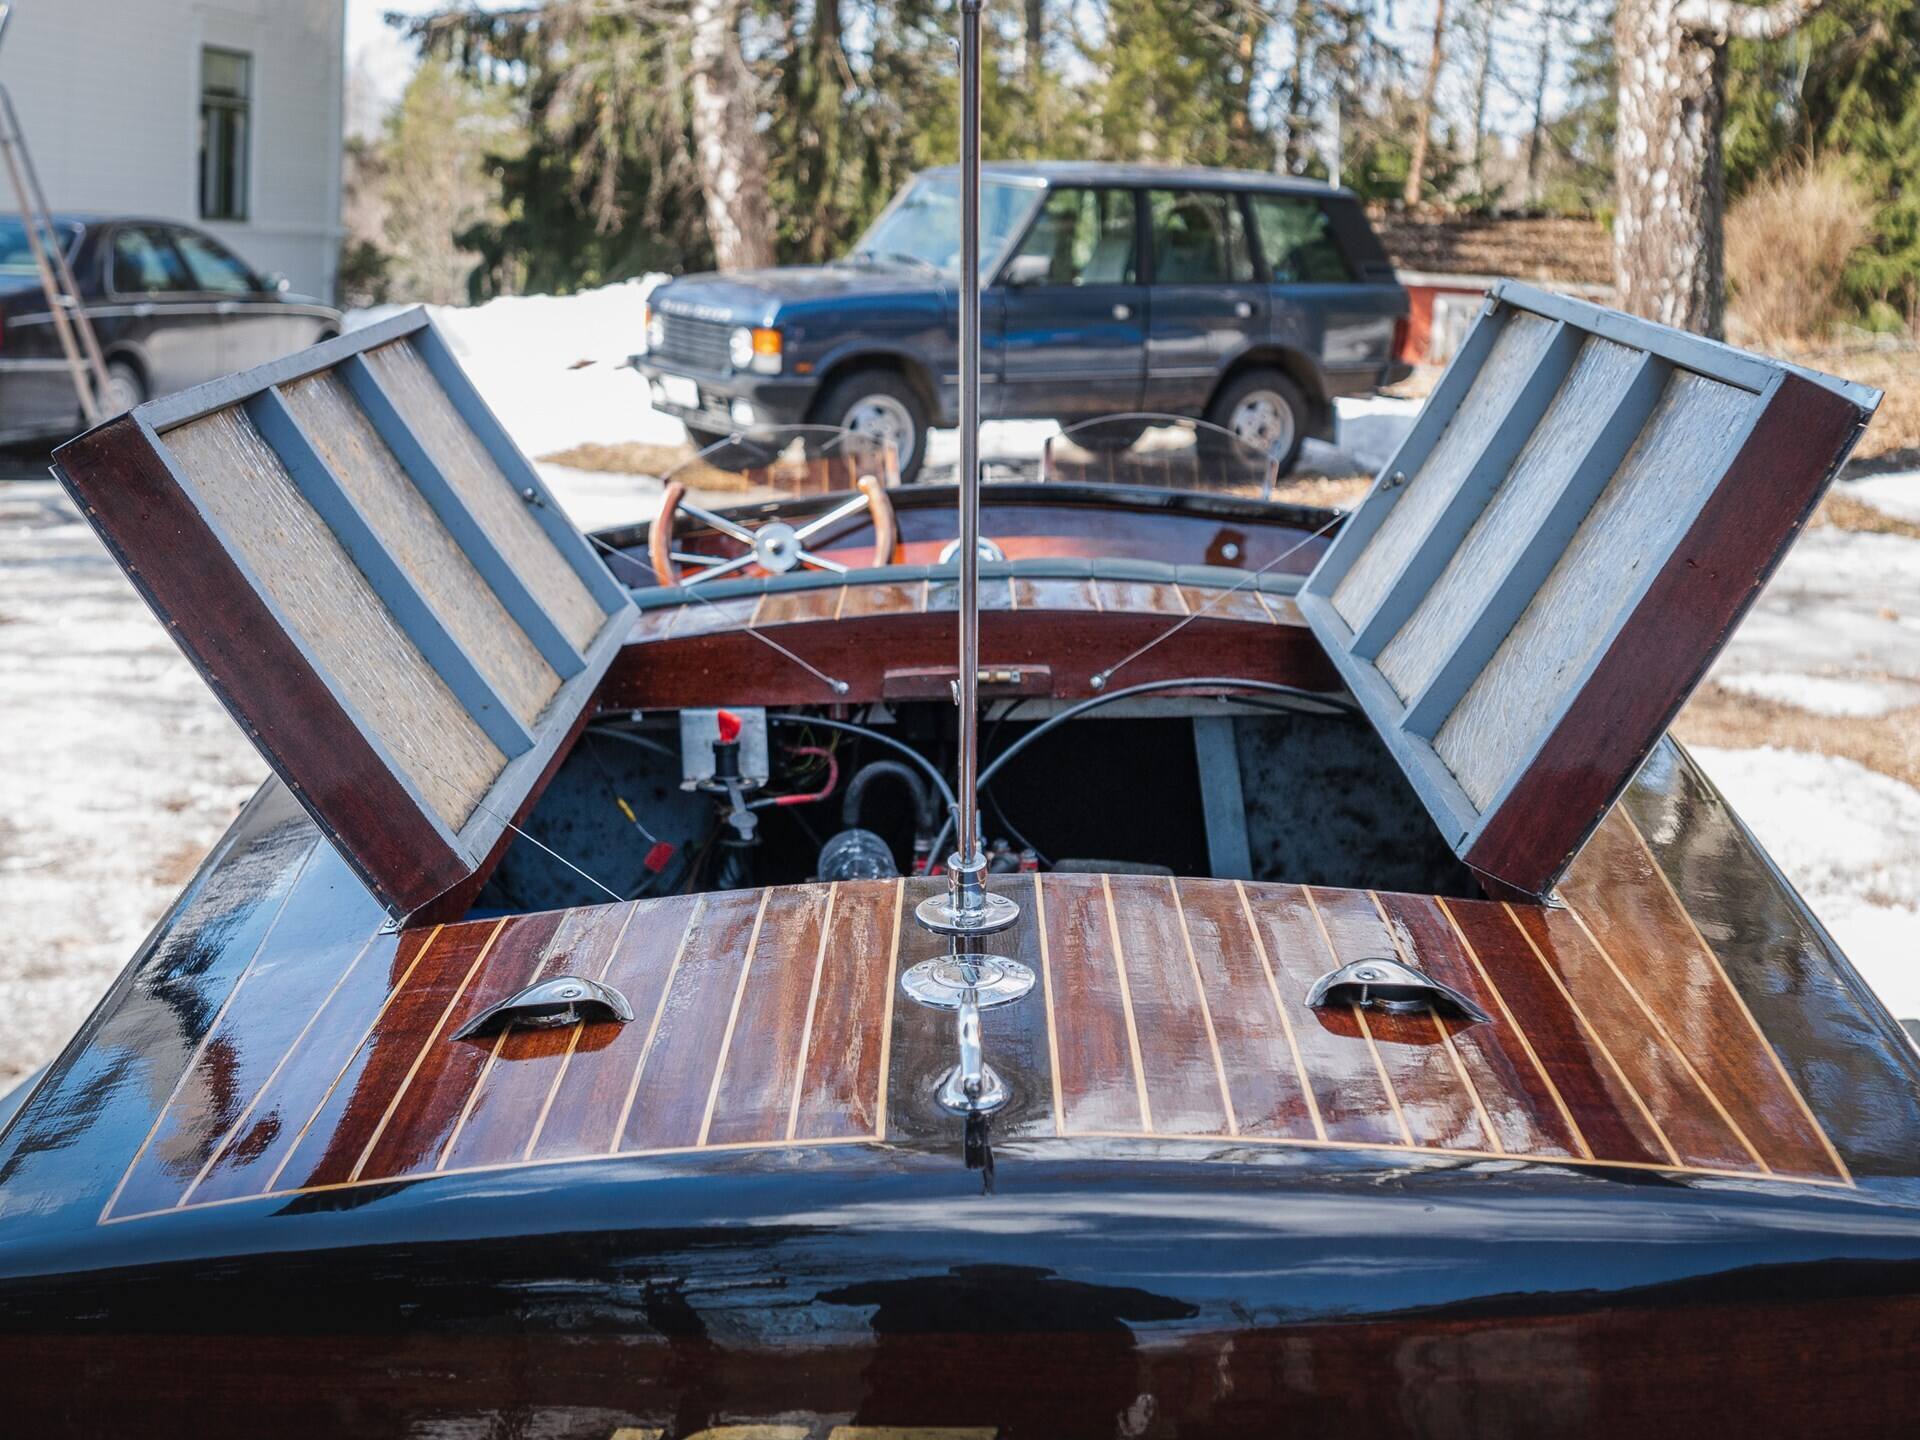 This home-built, elegant-looking boat is a real little poison bag 4